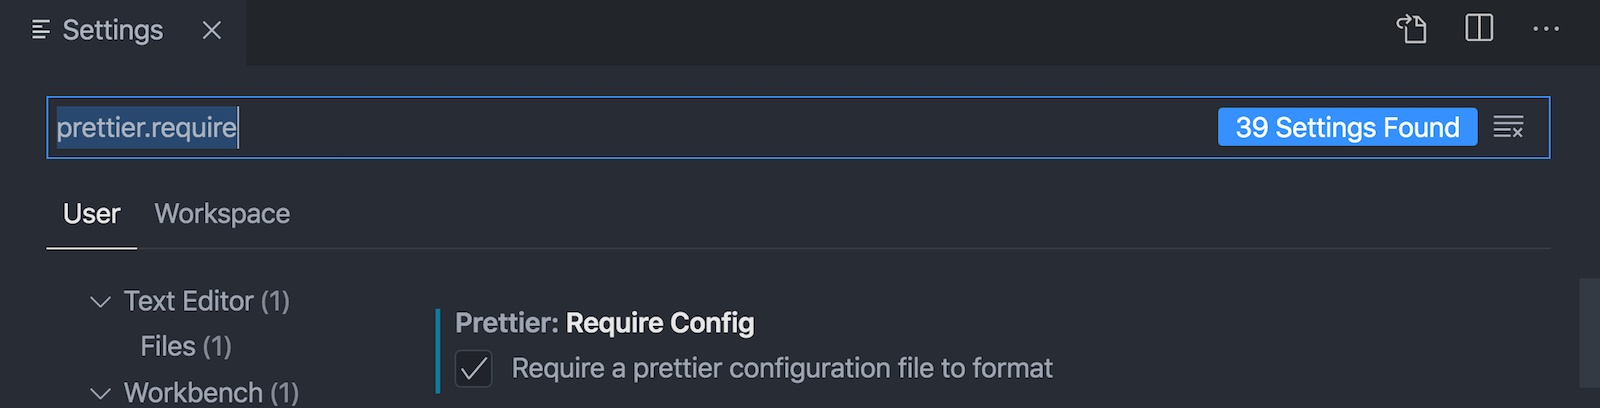 User global setting to require configuration file